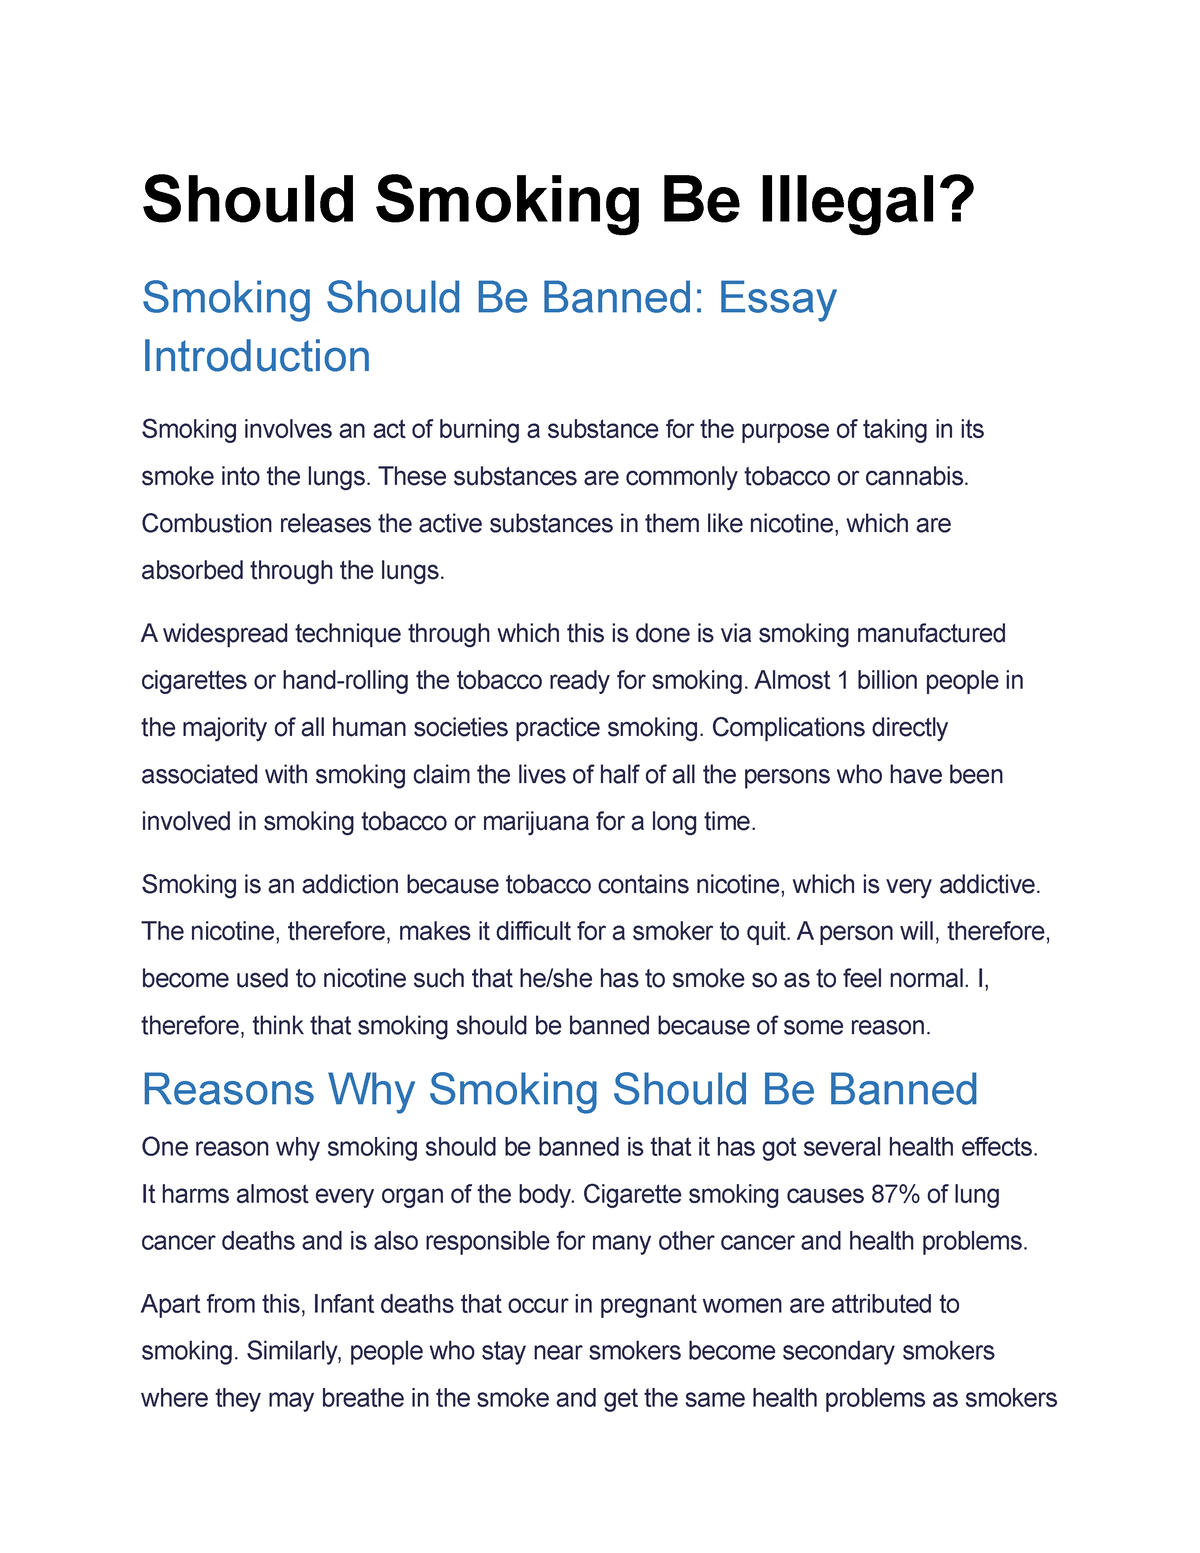 essay about banning smoking